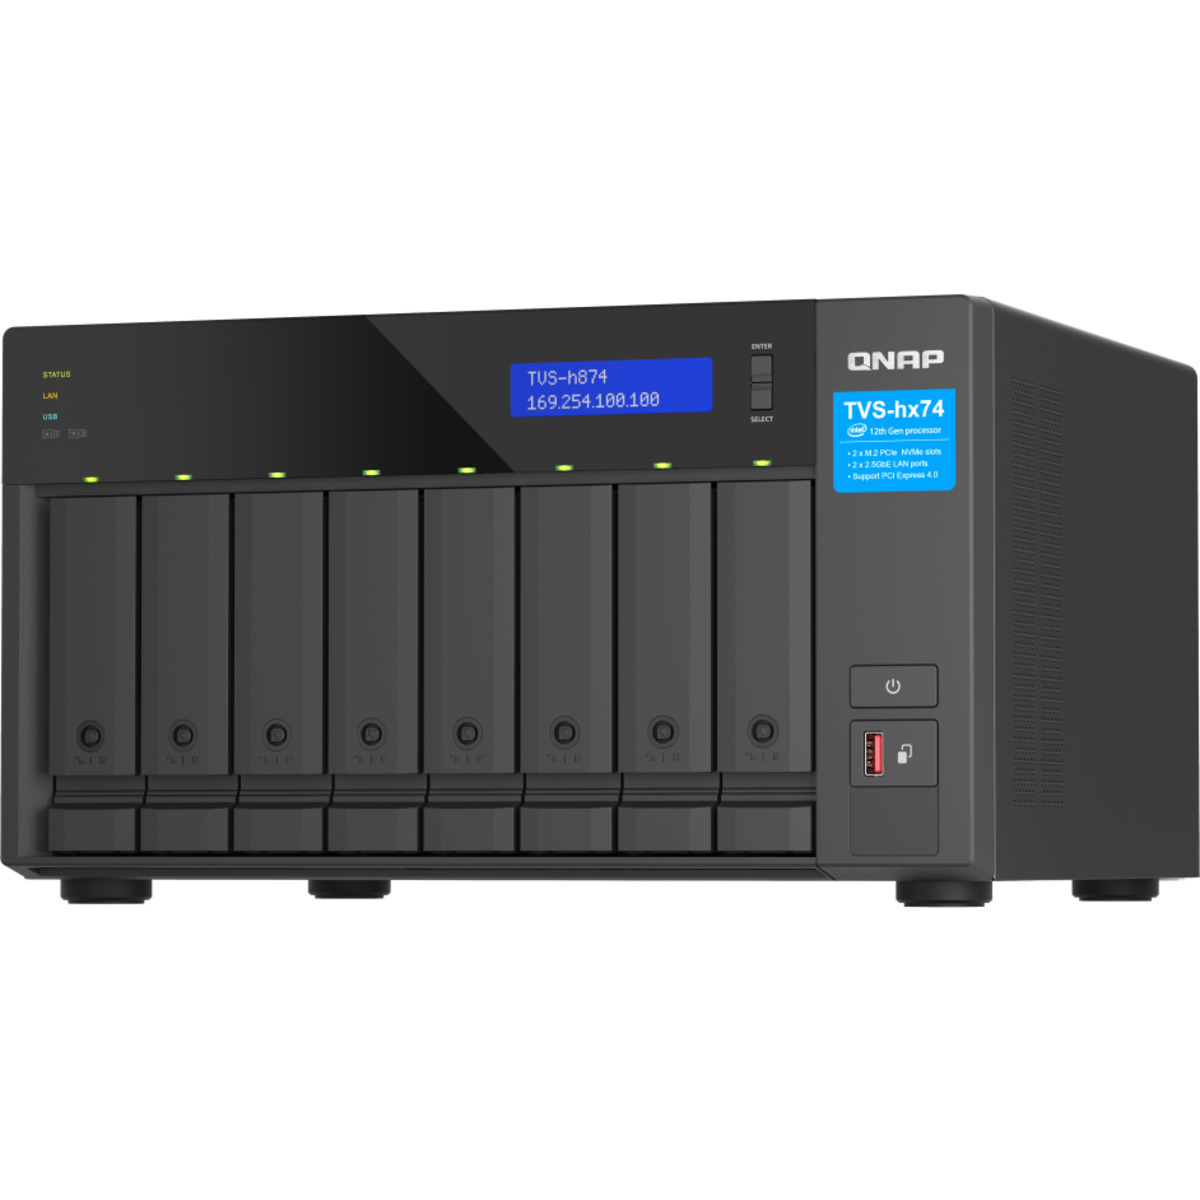 QNAP TVS-h874 Core i7 56tb 8-Bay Desktop Multimedia / Power User / Business NAS - Network Attached Storage Device 7x8tb TeamGroup EX2 Elite T253E2008T0C101 2.5 550/520MB/s SATA 6Gb/s SSD CONSUMER Class Drives Installed - Burn-In Tested TVS-h874 Core i7